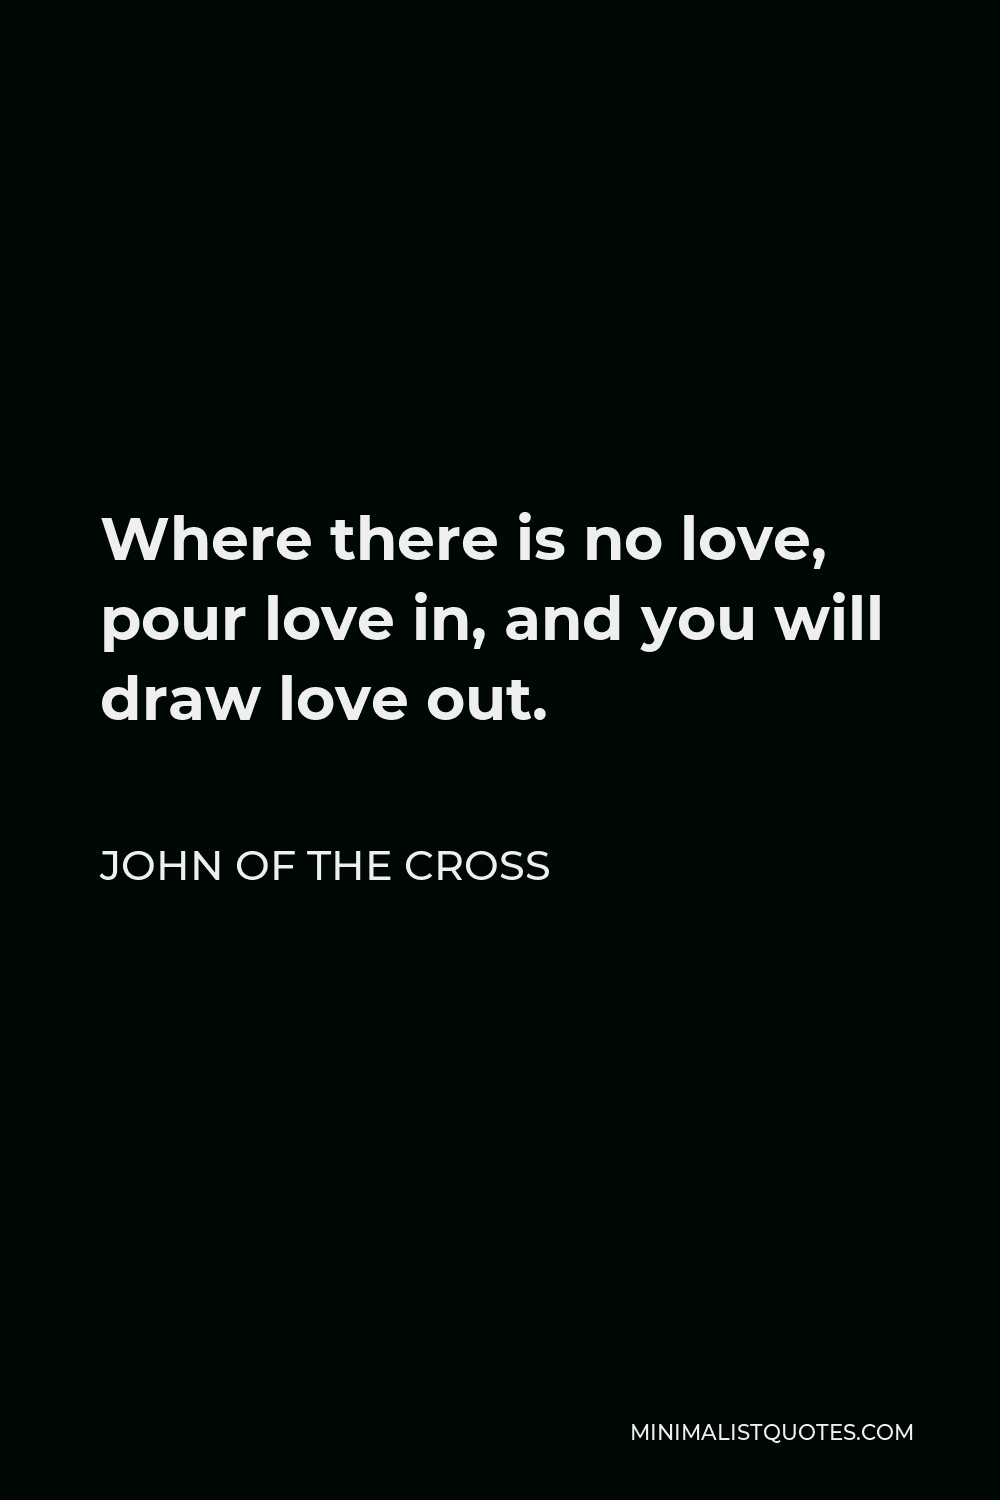 John of the Cross Quote - Where there is no love, pour love in, and you will draw love out.